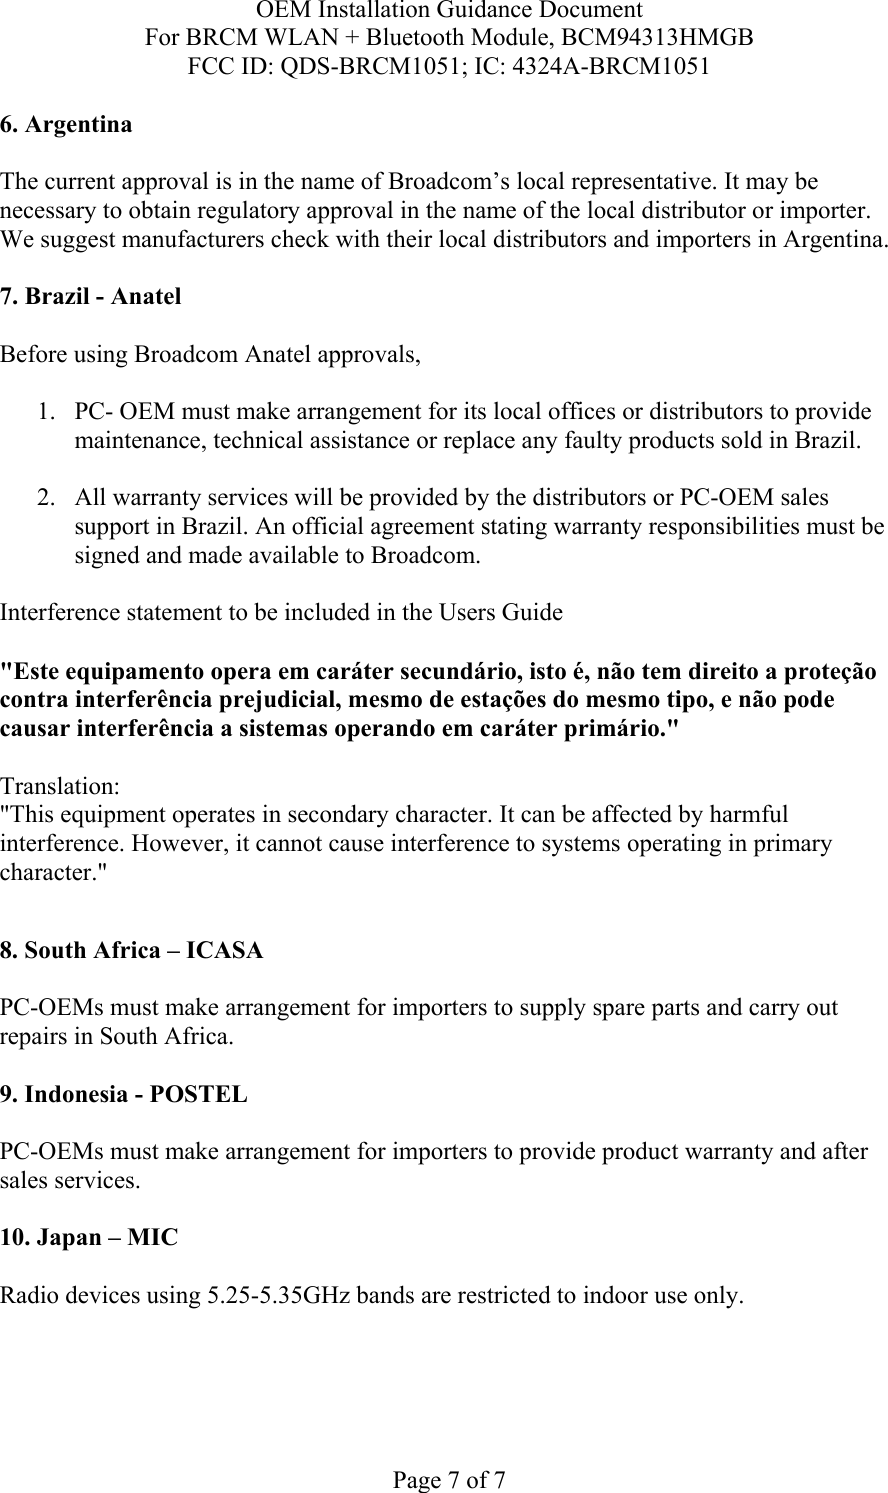 OEM Installation Guidance Document For BRCM WLAN + Bluetooth Module, BCM94313HMGB FCC ID: QDS-BRCM1051; IC: 4324A-BRCM1051  Page 7 of 7 6. Argentina   The current approval is in the name of Broadcom’s local representative. It may be necessary to obtain regulatory approval in the name of the local distributor or importer. We suggest manufacturers check with their local distributors and importers in Argentina.  7. Brazil - Anatel   Before using Broadcom Anatel approvals,   1. PC- OEM must make arrangement for its local offices or distributors to provide maintenance, technical assistance or replace any faulty products sold in Brazil.   2. All warranty services will be provided by the distributors or PC-OEM sales support in Brazil. An official agreement stating warranty responsibilities must be signed and made available to Broadcom.   Interference statement to be included in the Users Guide &quot;Este equipamento opera em caráter secundário, isto é, não tem direito a proteção contra interferência prejudicial, mesmo de estações do mesmo tipo, e não pode causar interferência a sistemas operando em caráter primário.&quot; Translation:  &quot;This equipment operates in secondary character. It can be affected by harmful interference. However, it cannot cause interference to systems operating in primary character.&quot;    8. South Africa – ICASA  PC-OEMs must make arrangement for importers to supply spare parts and carry out repairs in South Africa.  9. Indonesia - POSTEL  PC-OEMs must make arrangement for importers to provide product warranty and after sales services.   10. Japan – MIC  Radio devices using 5.25-5.35GHz bands are restricted to indoor use only.  